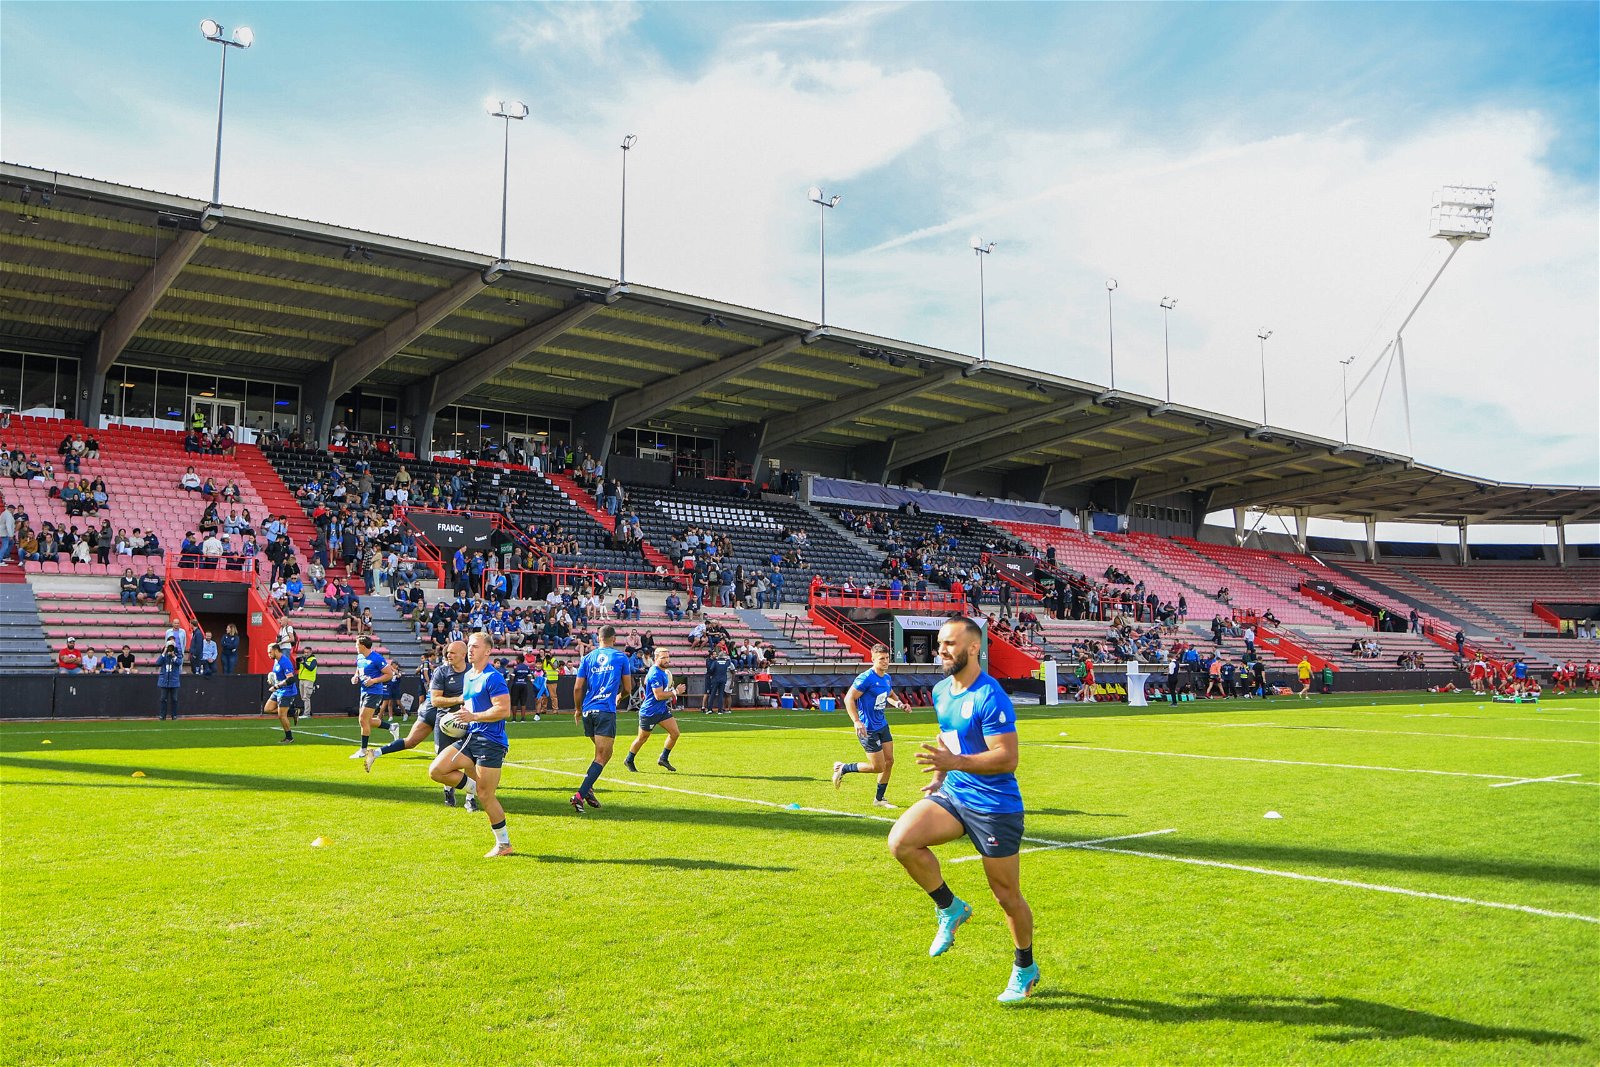 Players warm up before a Championship match at the Stade Ernest-Wallon, which has red and black seats. It's large, but yet to fill up with fans.